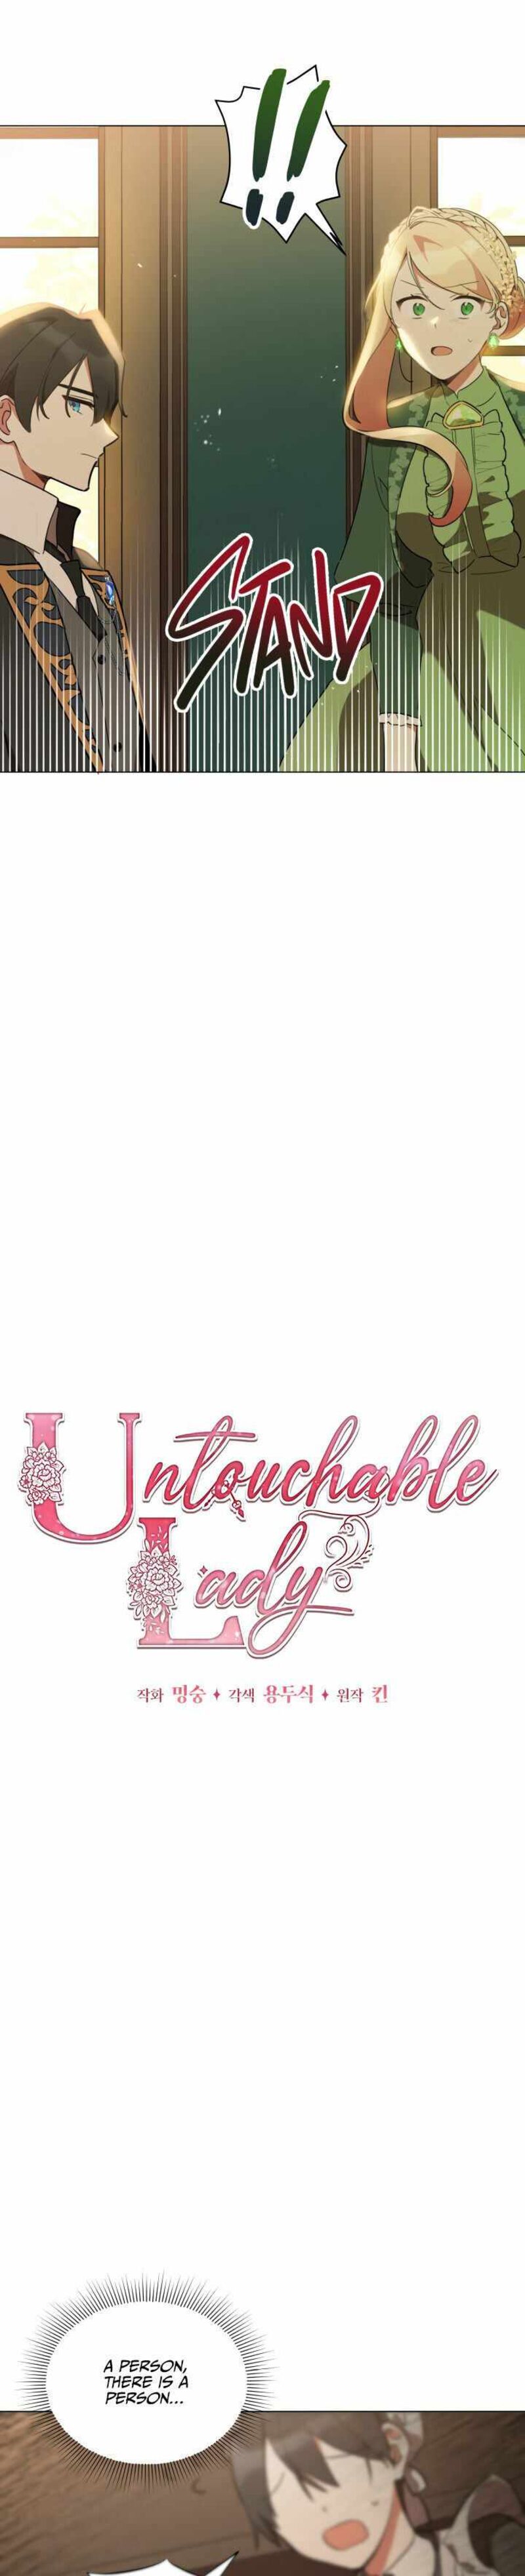 Untouchable Lady Chapter 15 Page 12